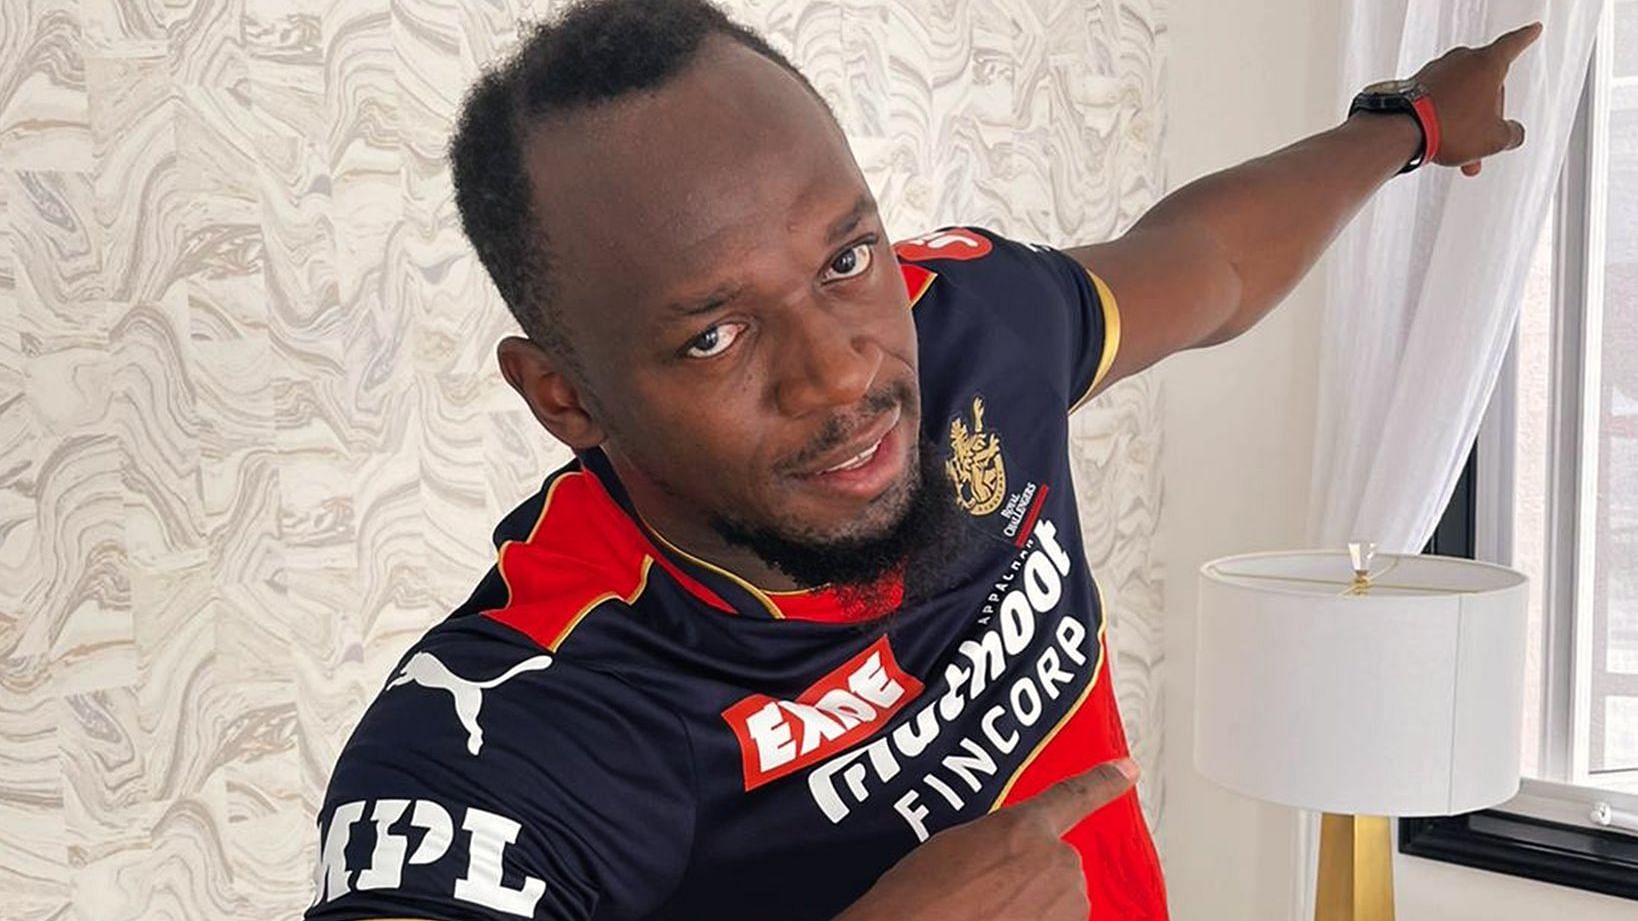 Usain Bolt poses in RCB’s jersey ahead of IPL 2021